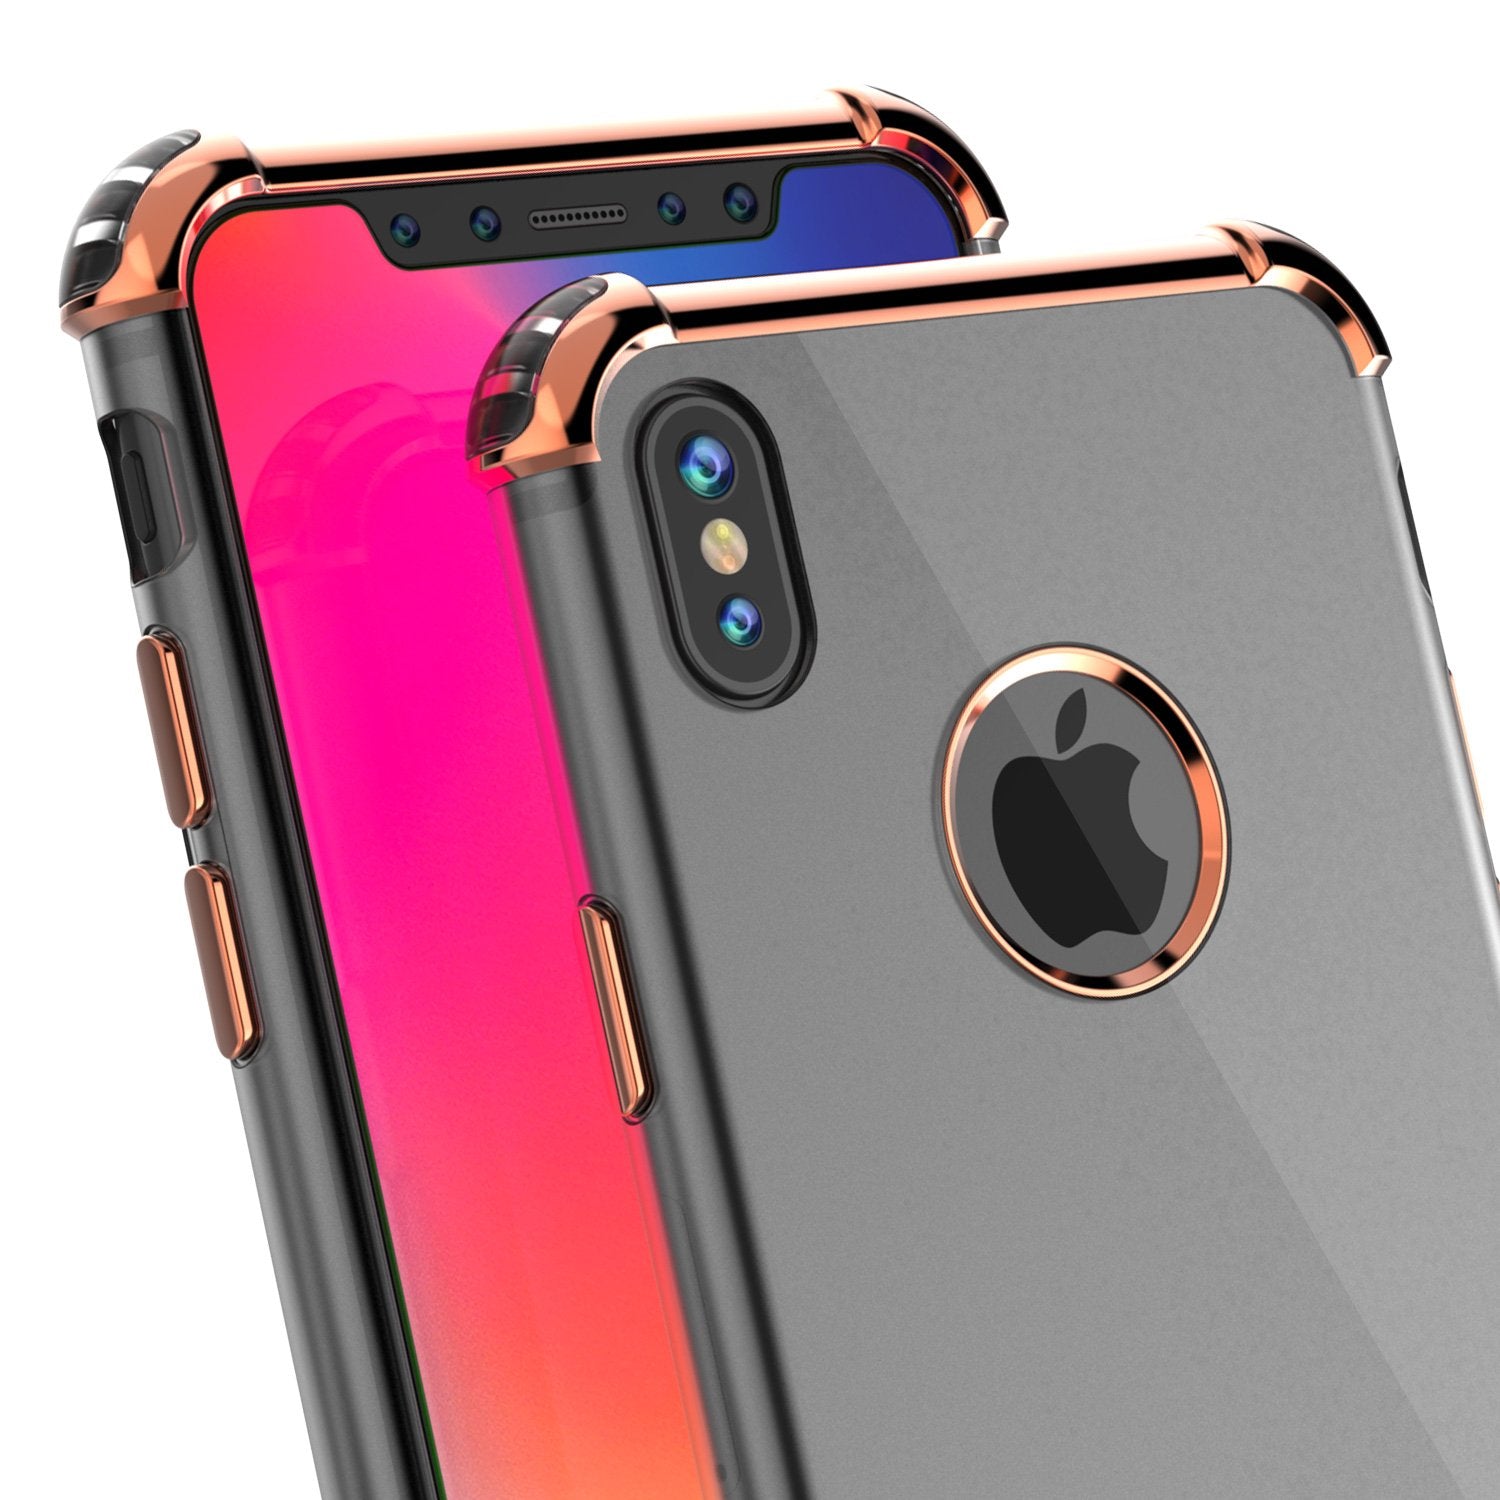 iPhone X Case, Punkcase BLAZE RoseGold Series Protective Cover W/ PunkShield Screen Protector